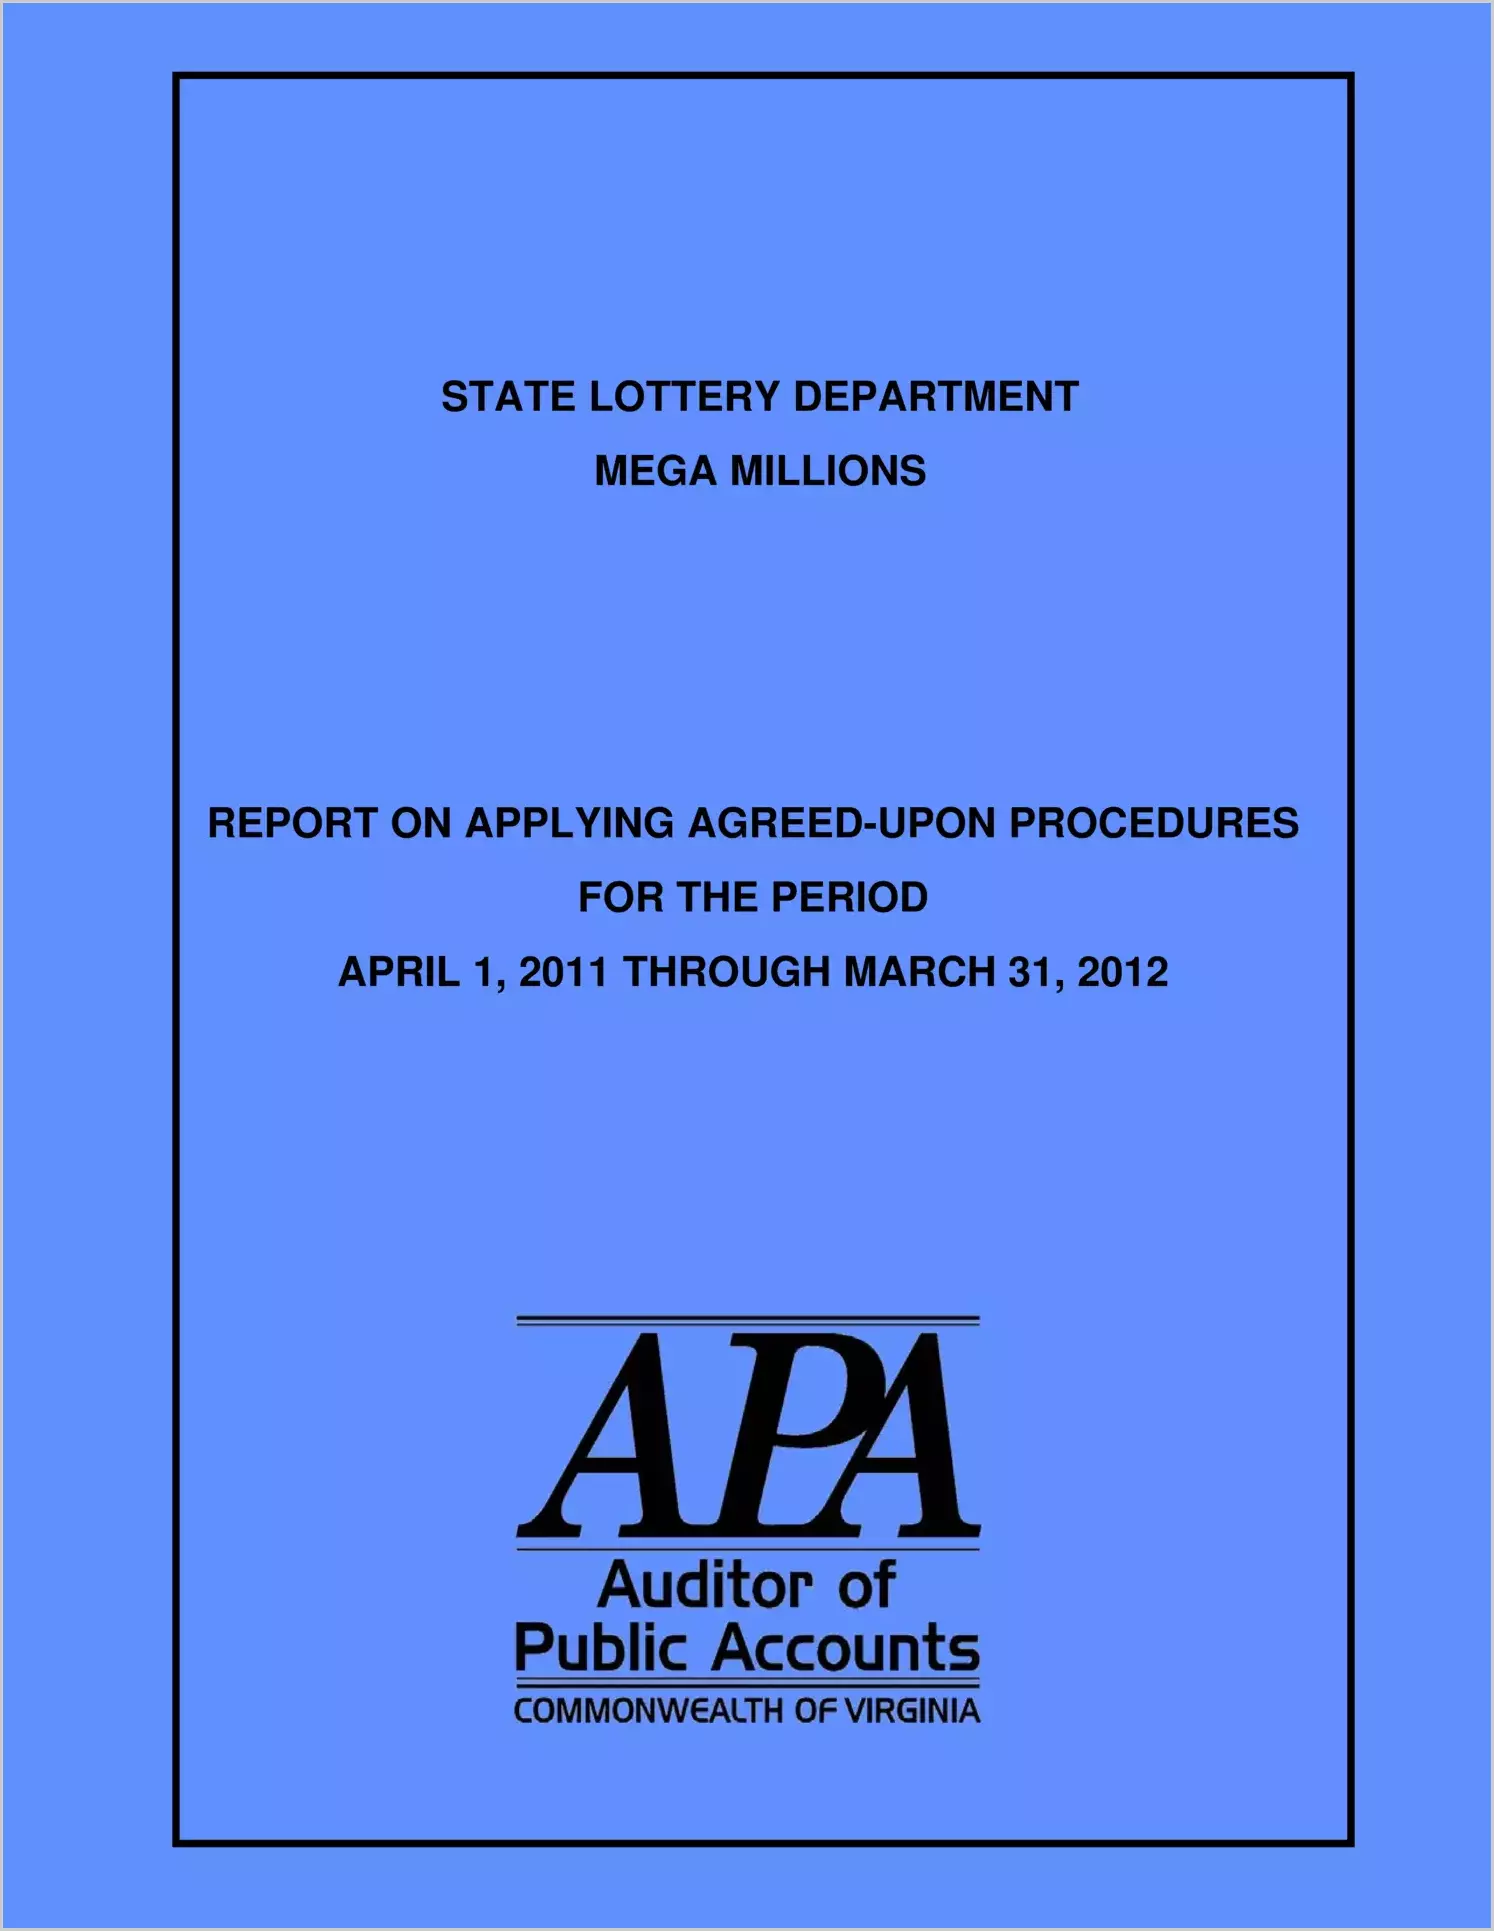 State Lottery Department Mega Millions report on Applying Agreed-Upon Procedures for the period April 1, 2011 through March 31, 2012